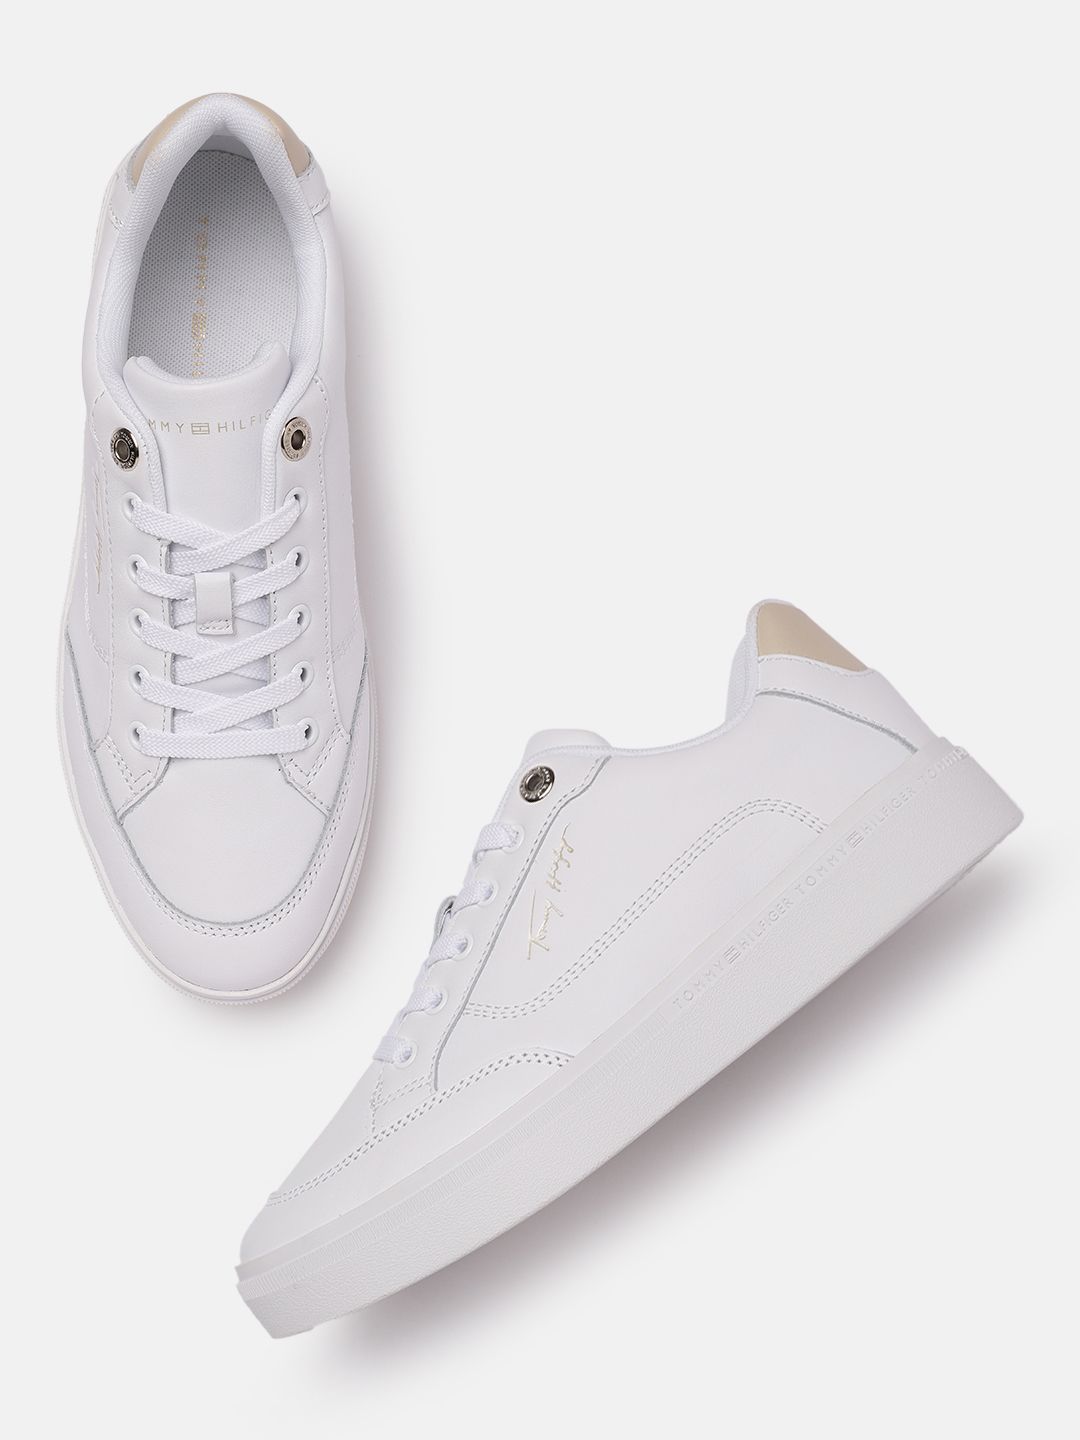 Tommy Hilfiger Women White Leather Sneakers Price in India